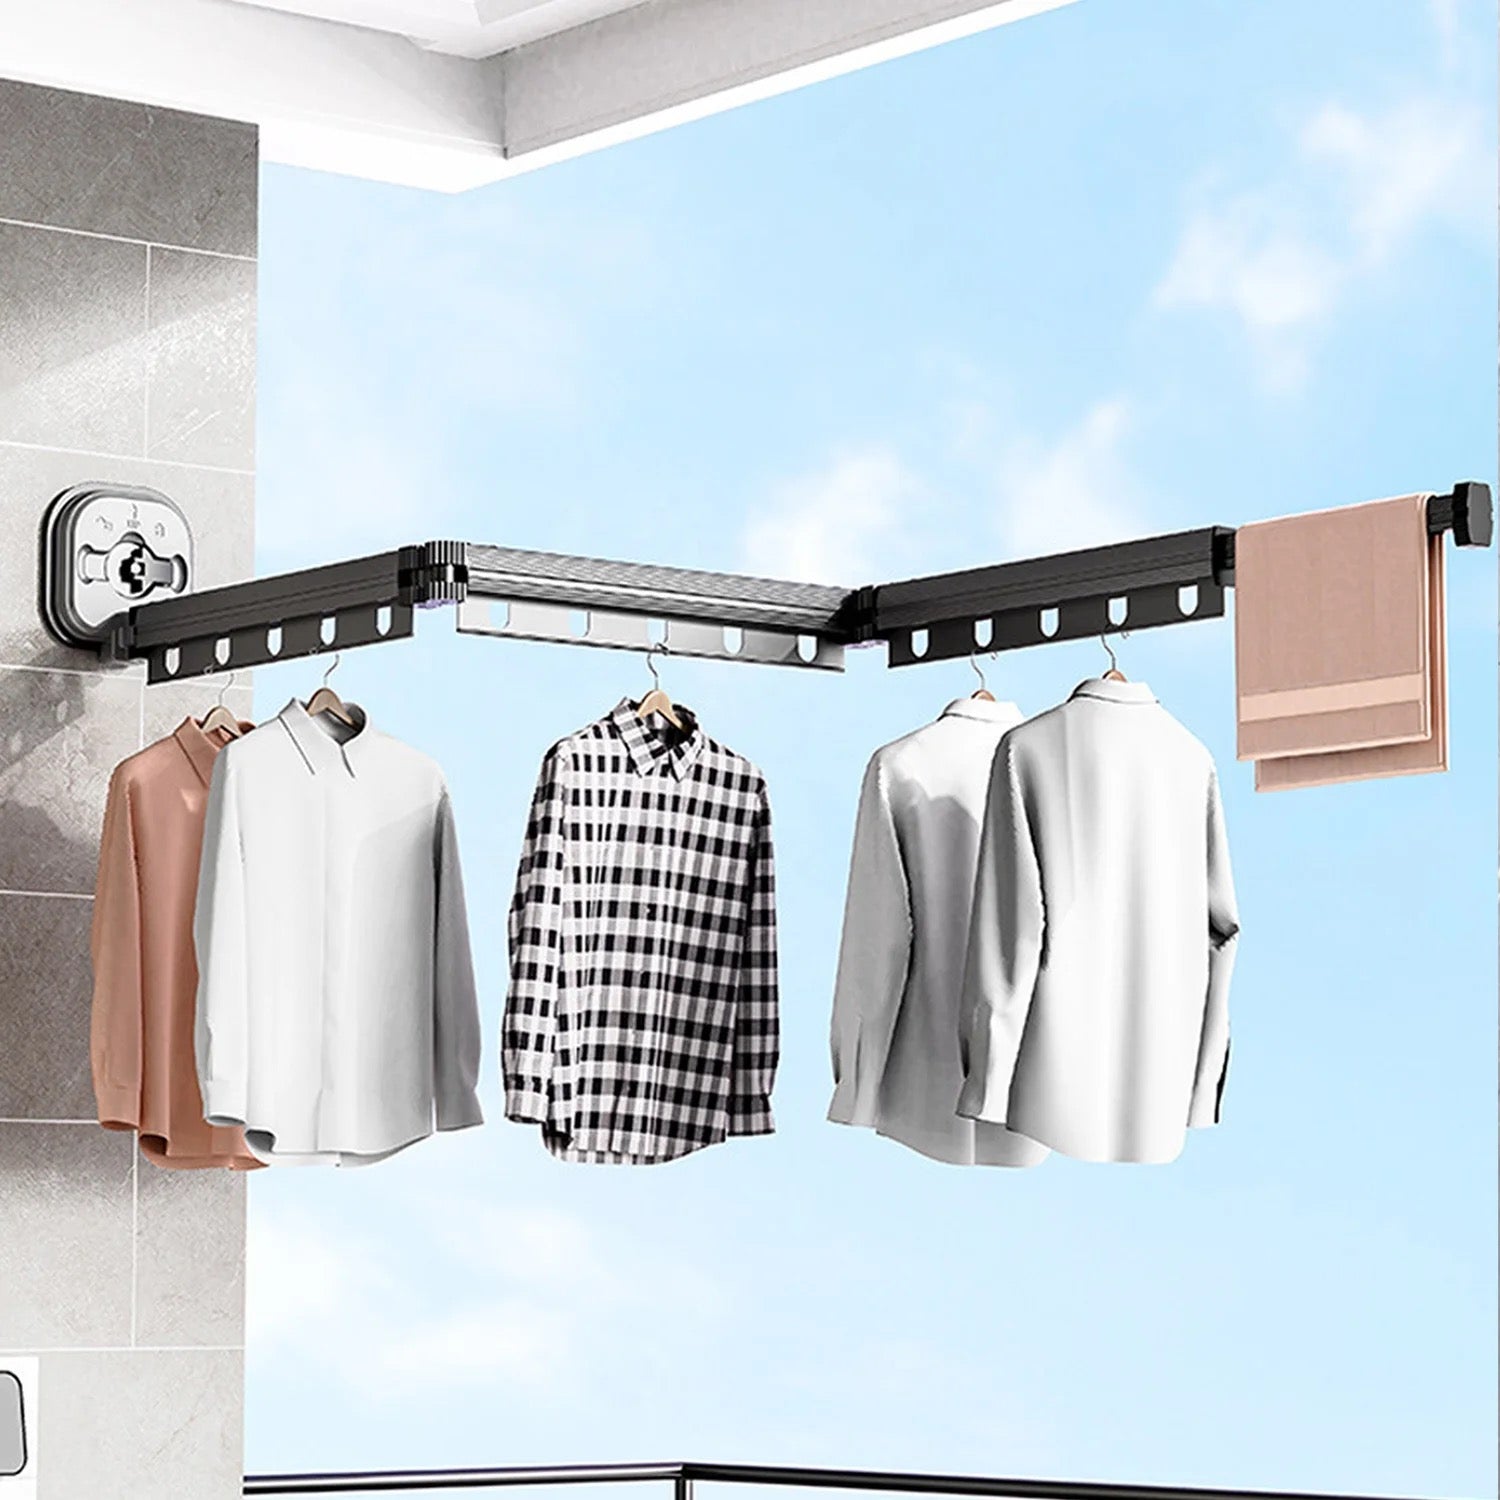 Folding Laundry Rack mounted on a wall with shirts hung 